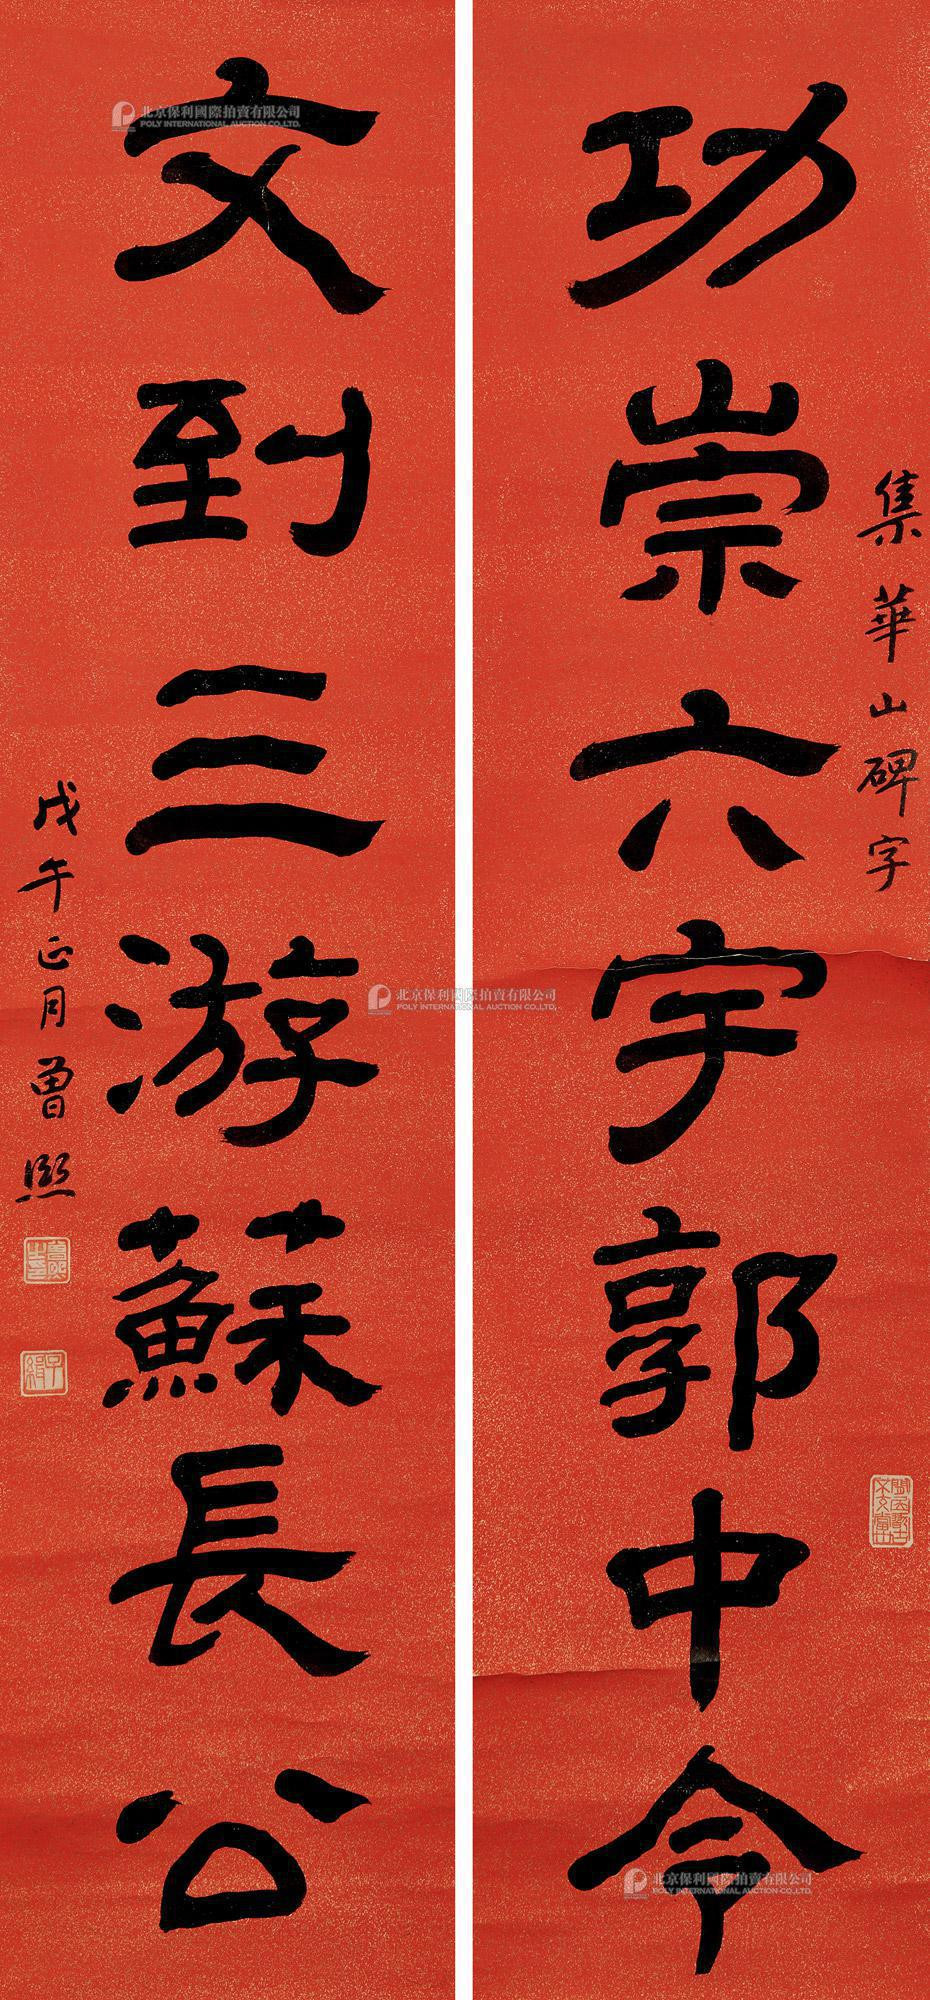 Seven - Characters Calligraphic Couplet in Offical Script